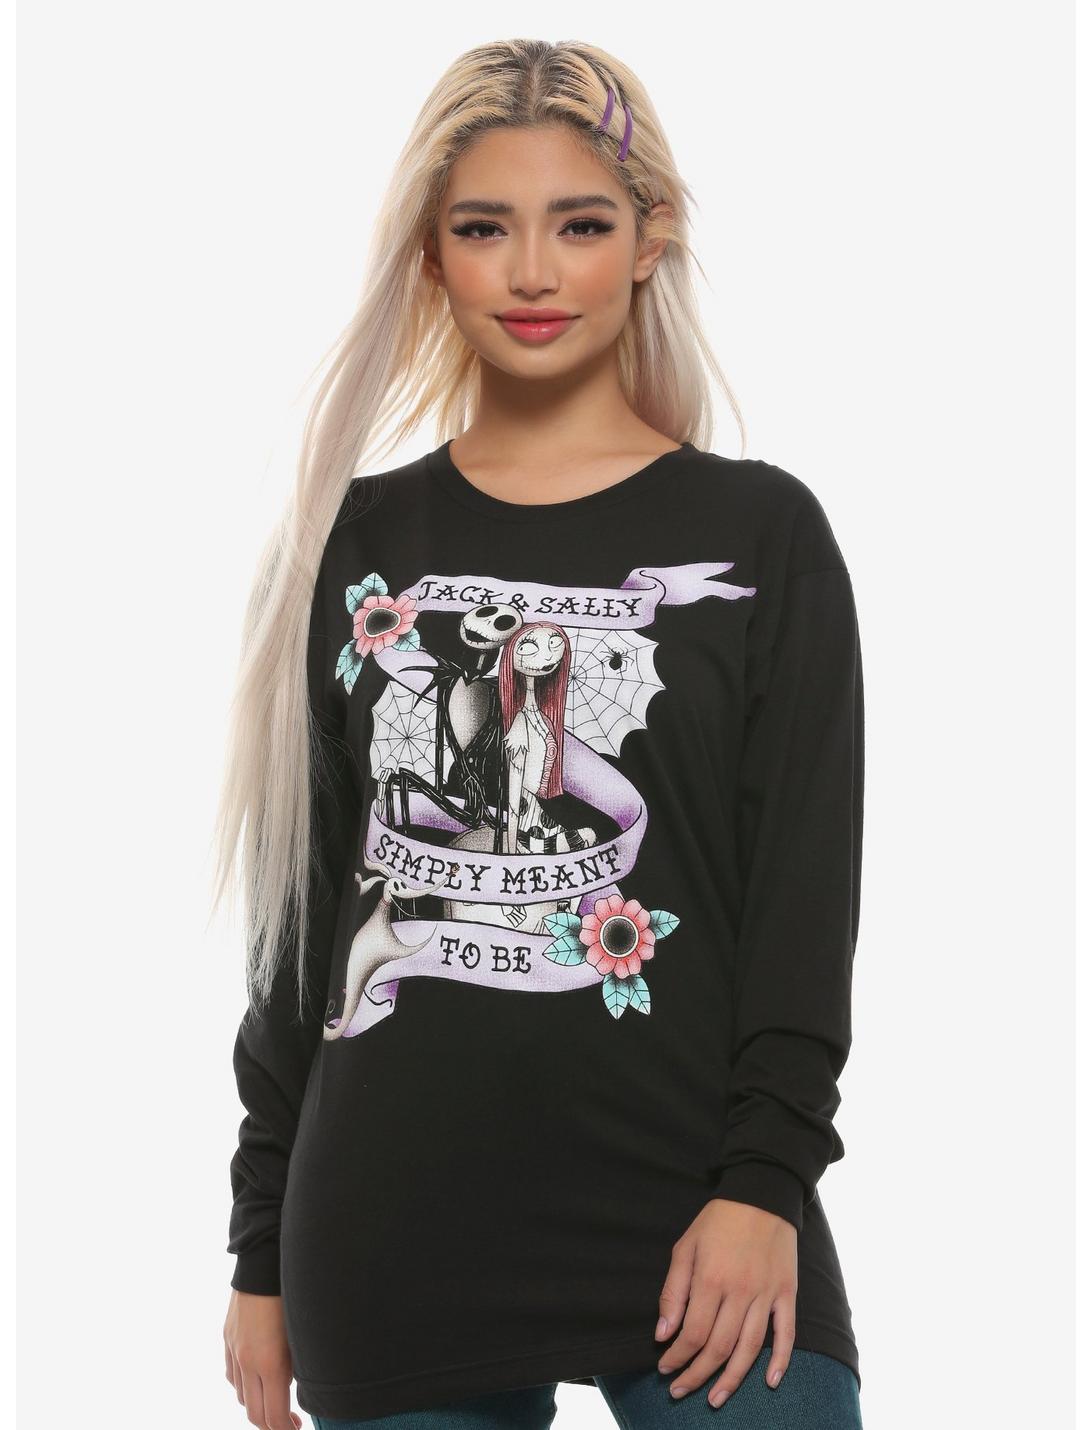 The Nightmare Before Christmas Jack & Sally Meant To Be Girls Long-Sleeve T-Shirt, MULTI, hi-res